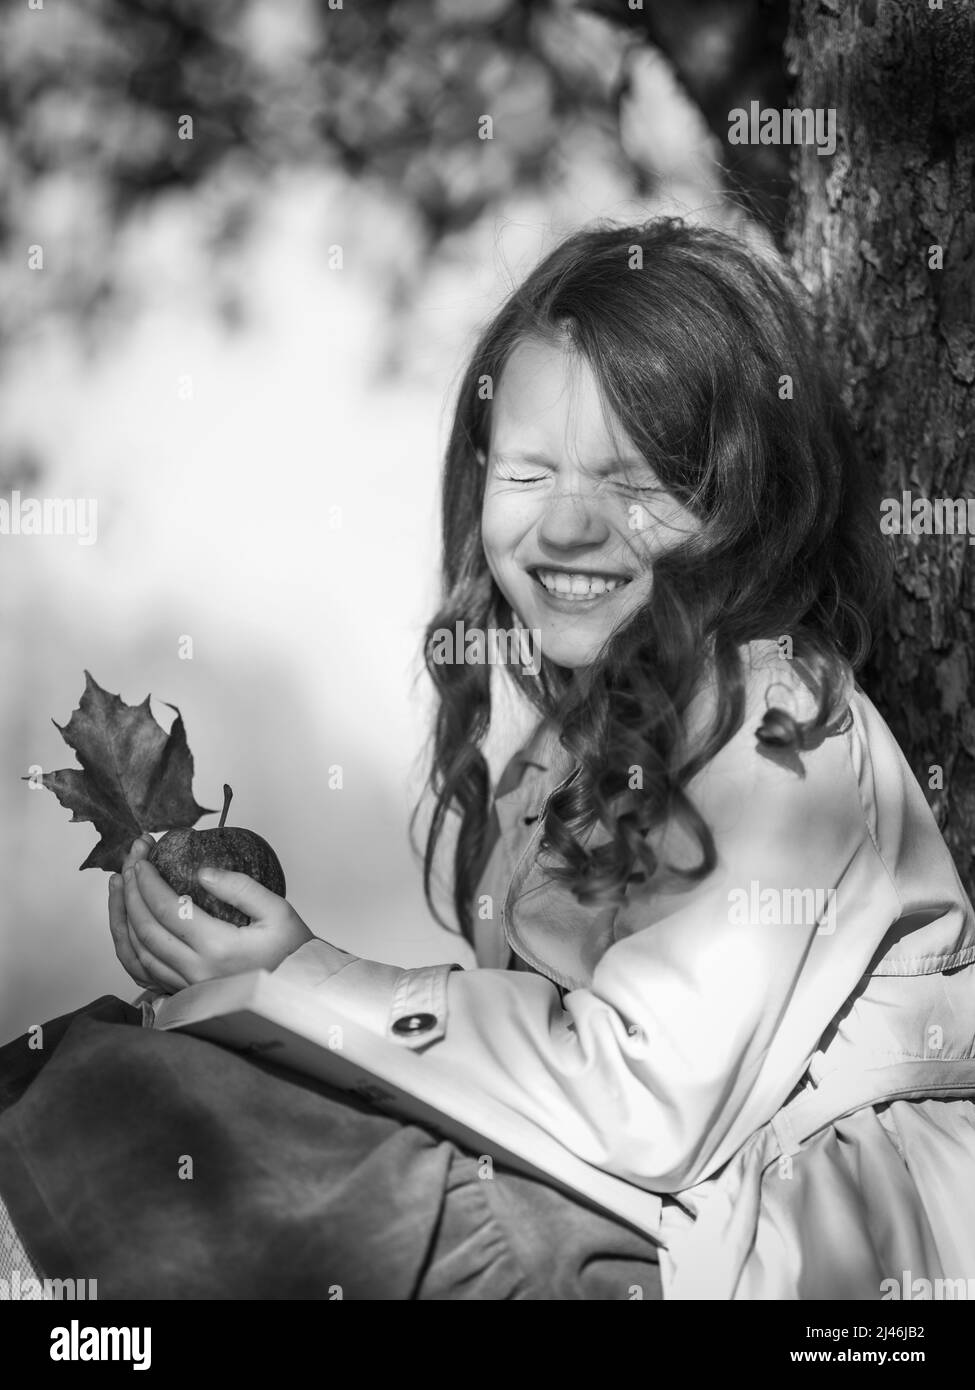 A happy girl in the park with a book and an apple in her hands. Stock Photo